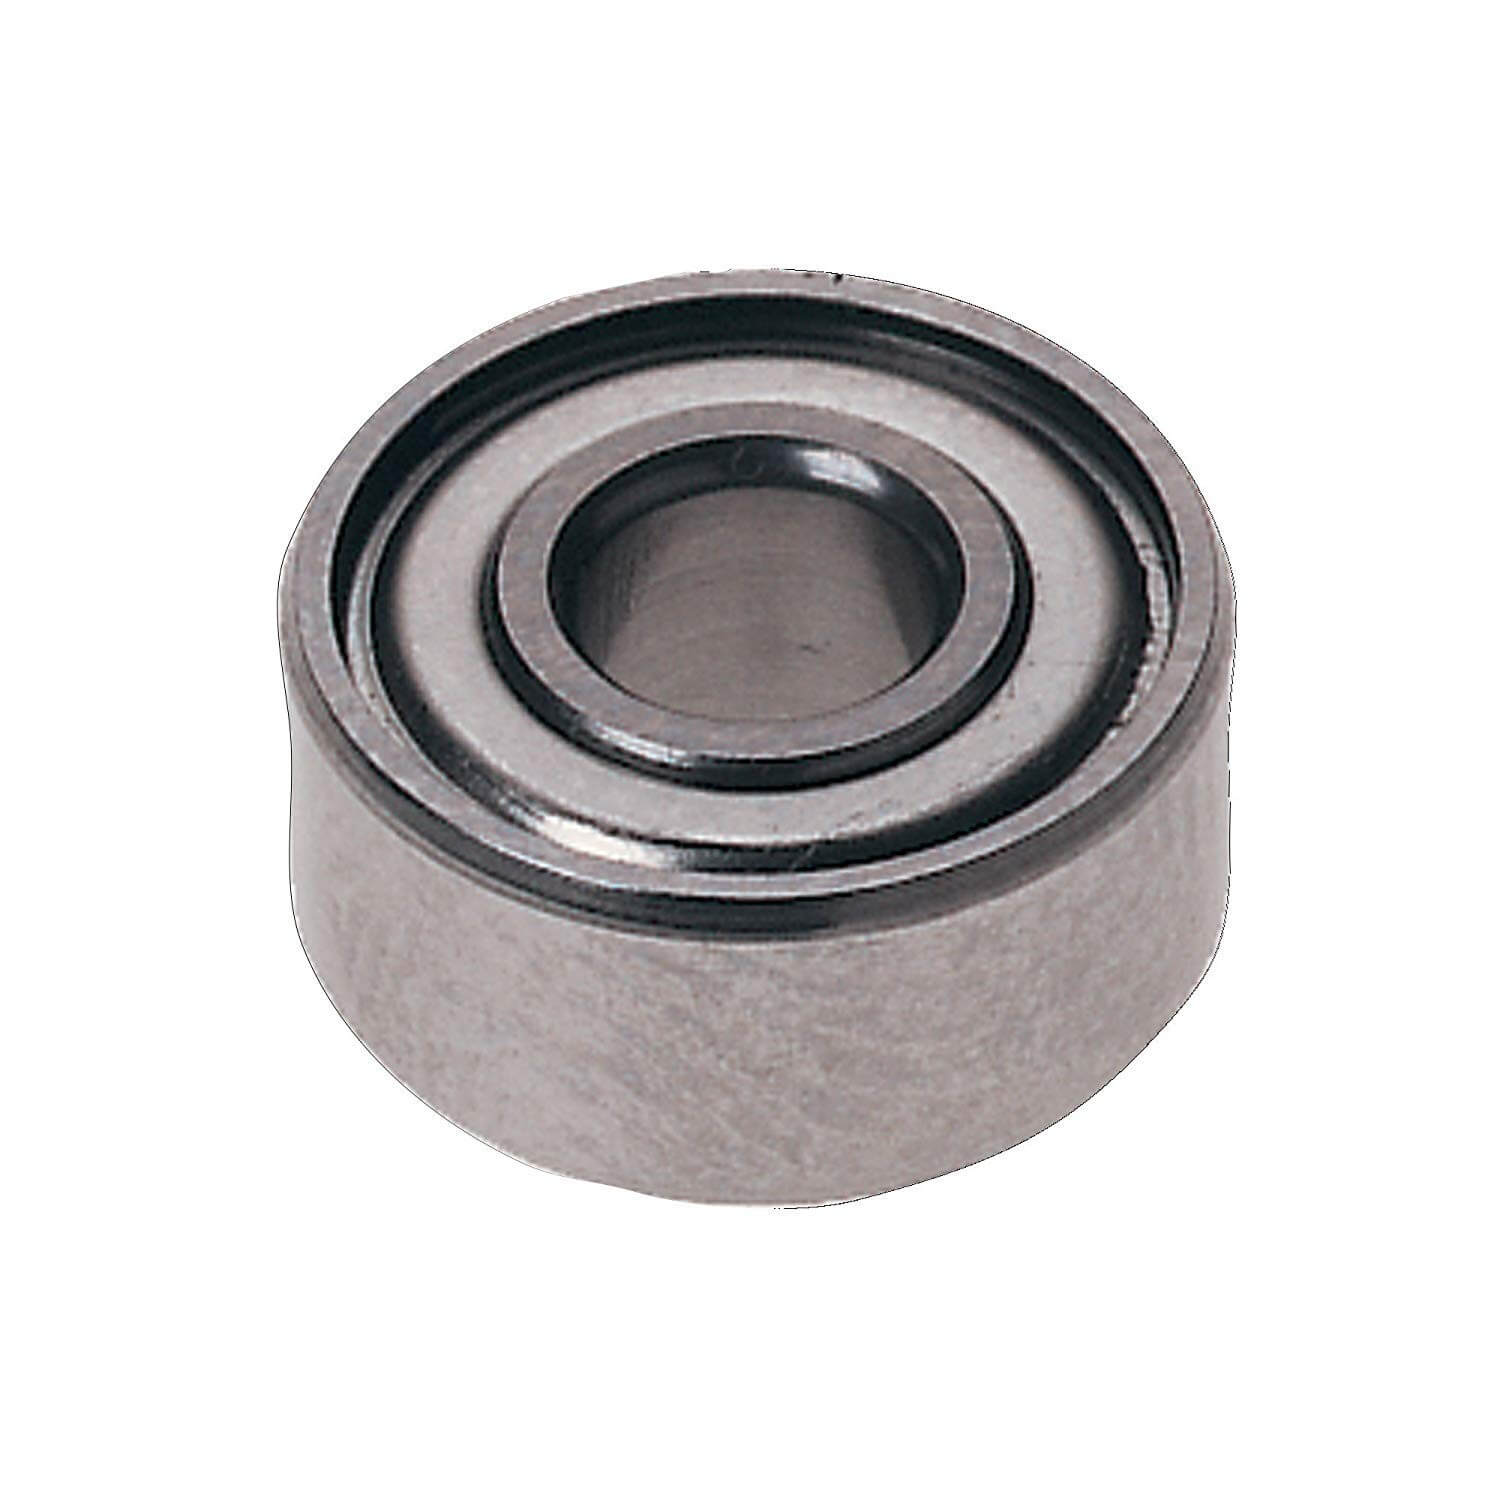 Freud 1/2" Ball Bearing - wise-line-tools